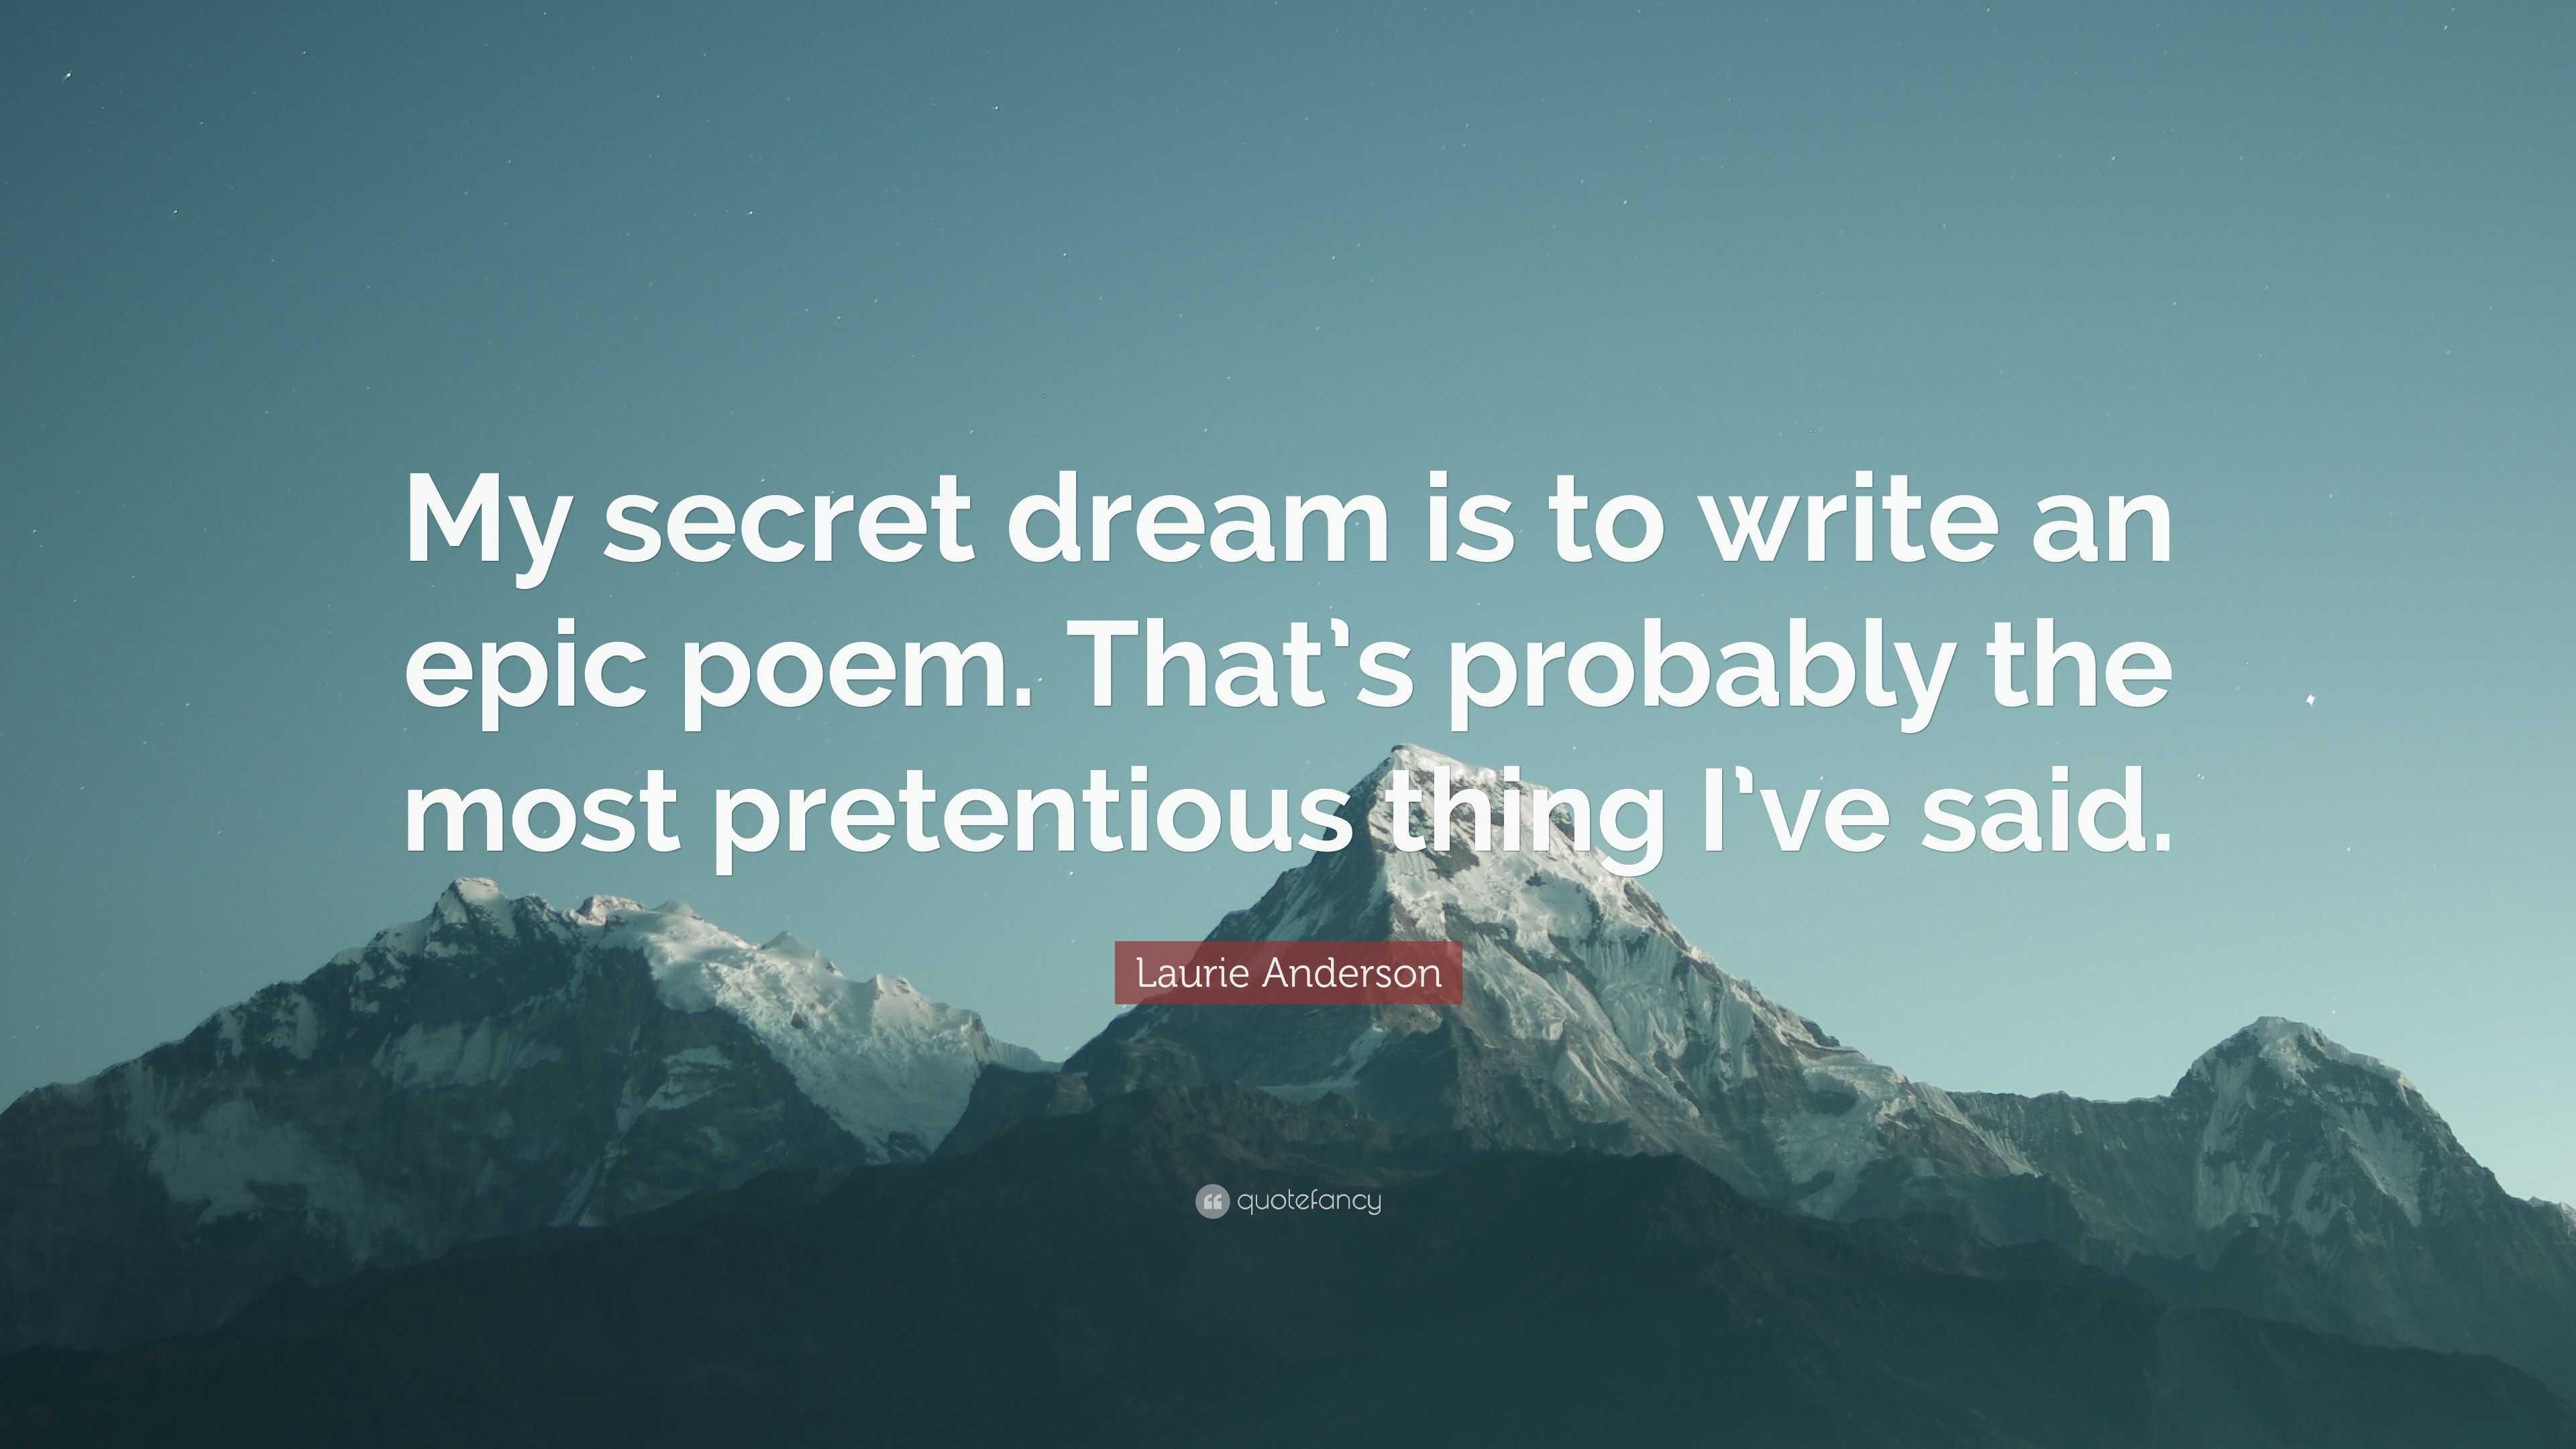 Laurie Anderson Quote: “My secret dream is to write an epic poem